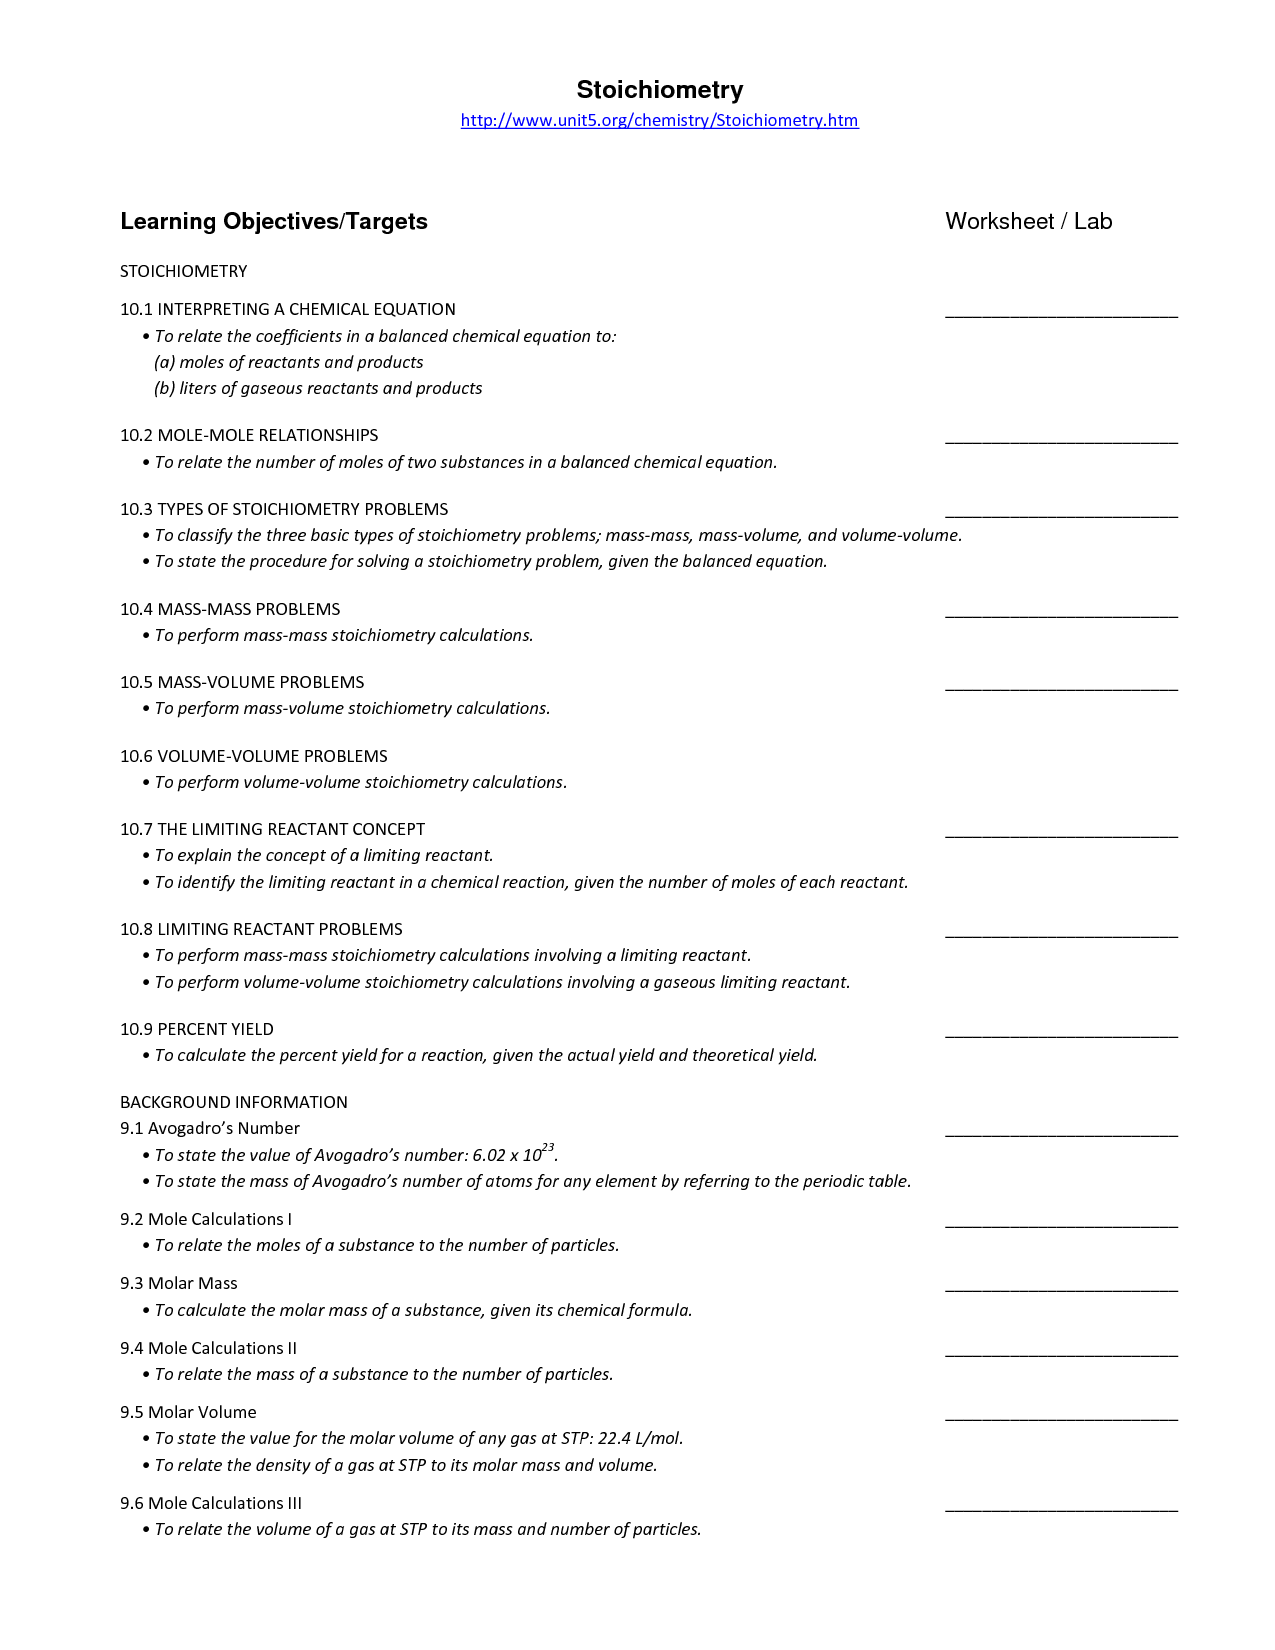 13 Best Images of Chemistry Mole Worksheet  Mole Avogadro Number Worksheets and Answers, Mole 